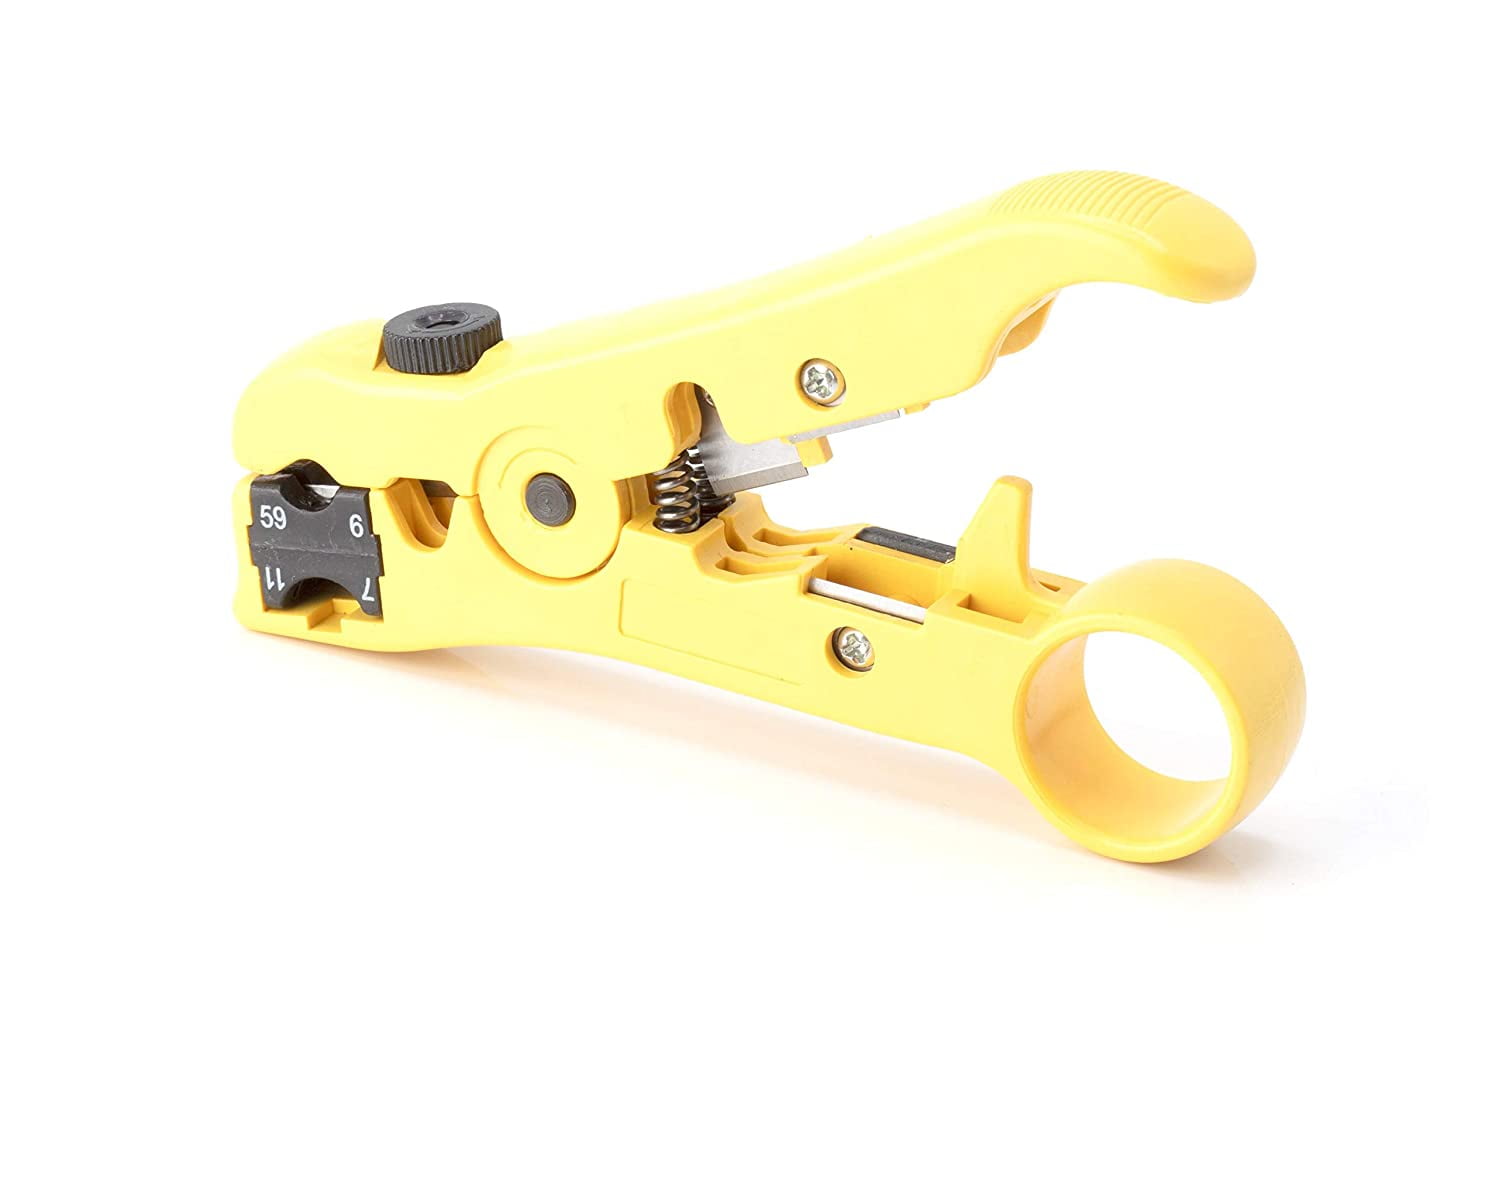 2Pcs Coaxial Cable Wire Cutter Stripper Tool for Cat5 Cat6 Coax RG59 /RG6 RG7 US 